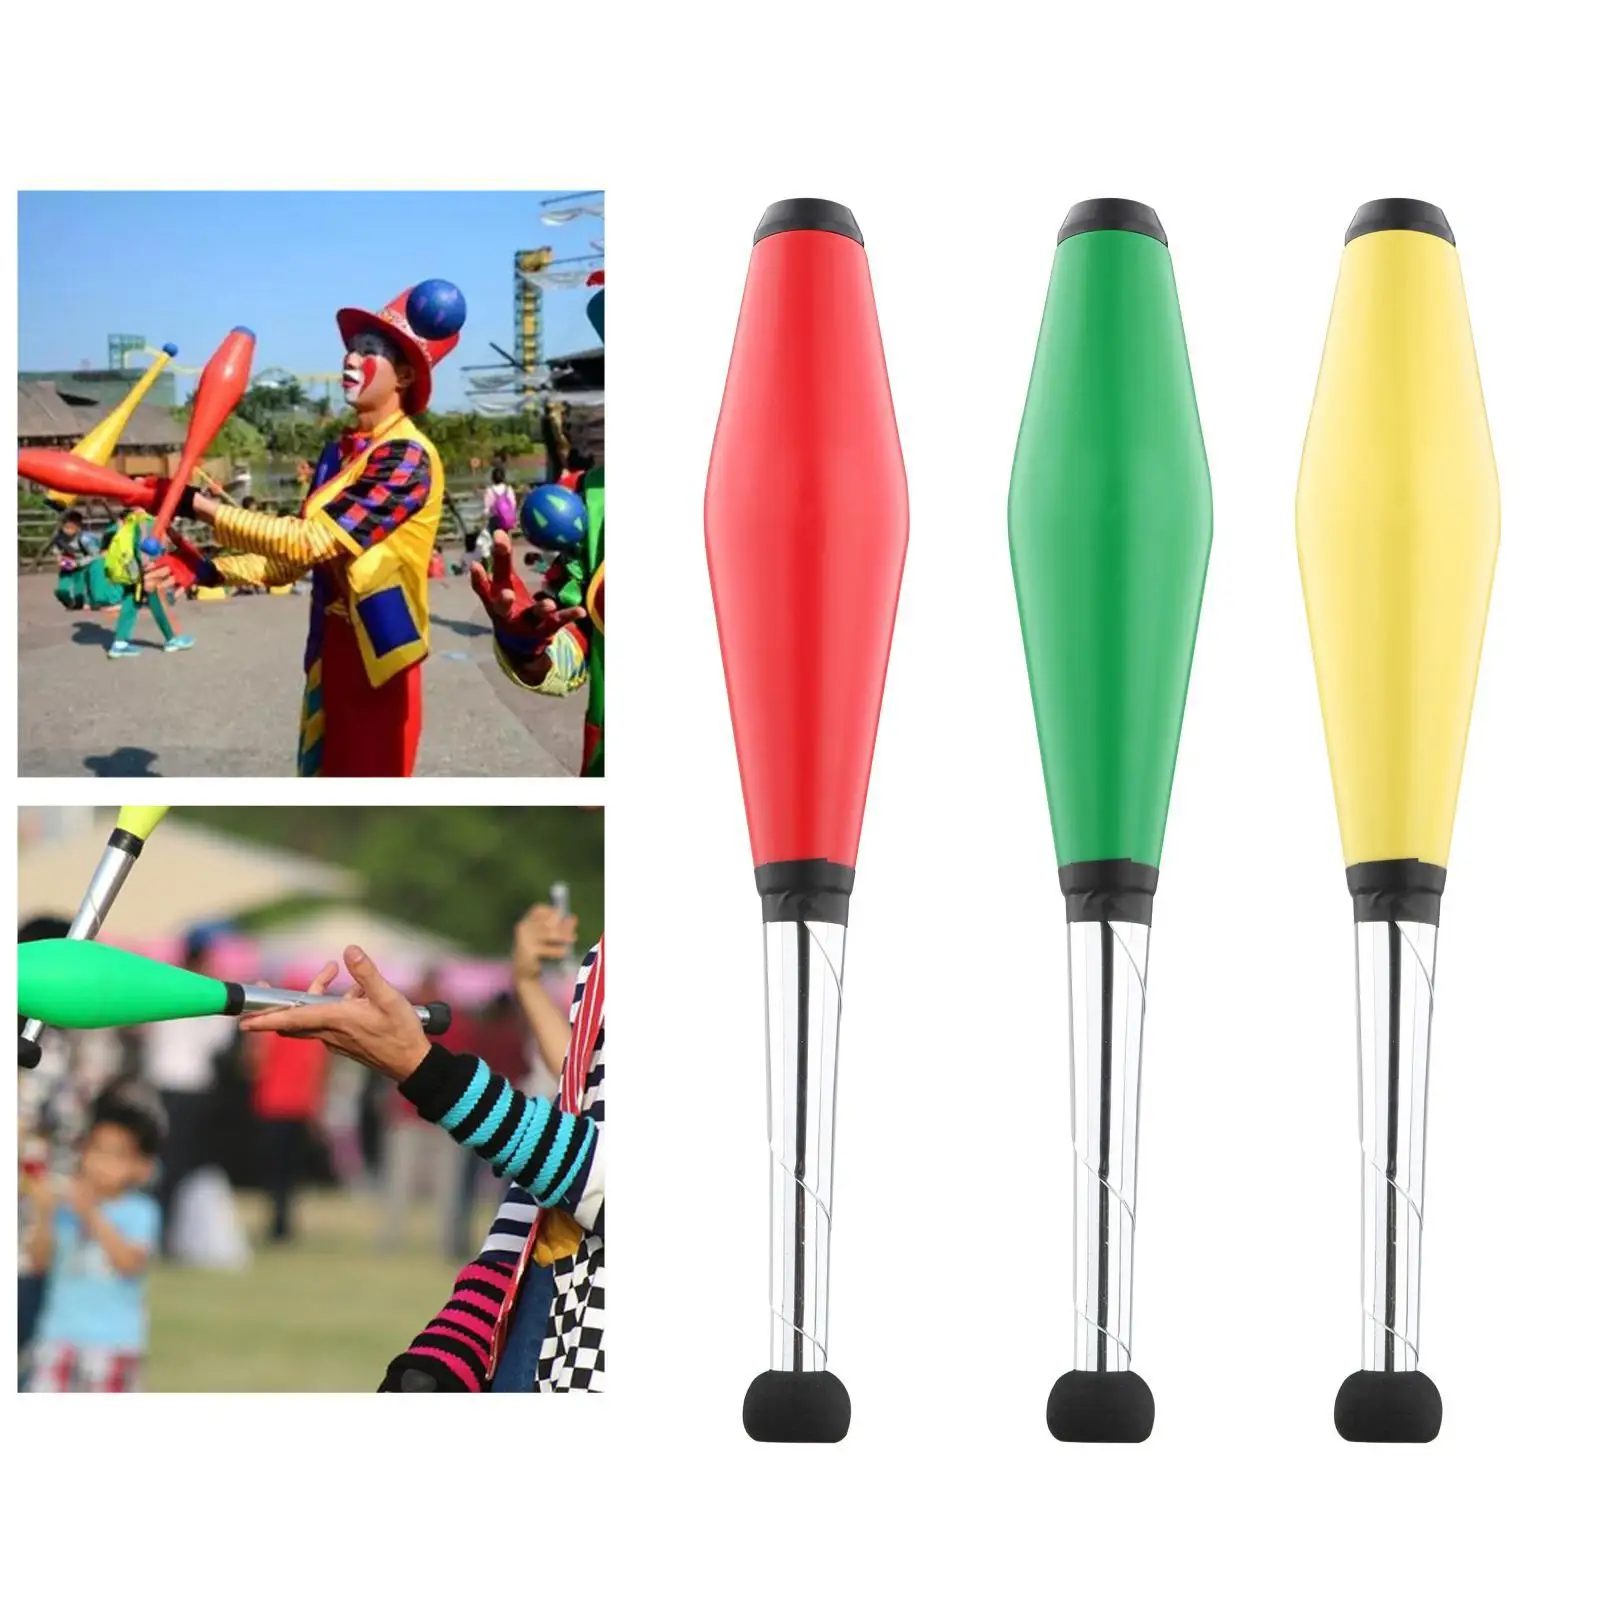 Professional Juggling Clubs High-Quality Sticks Pins for Gym Comedy Children